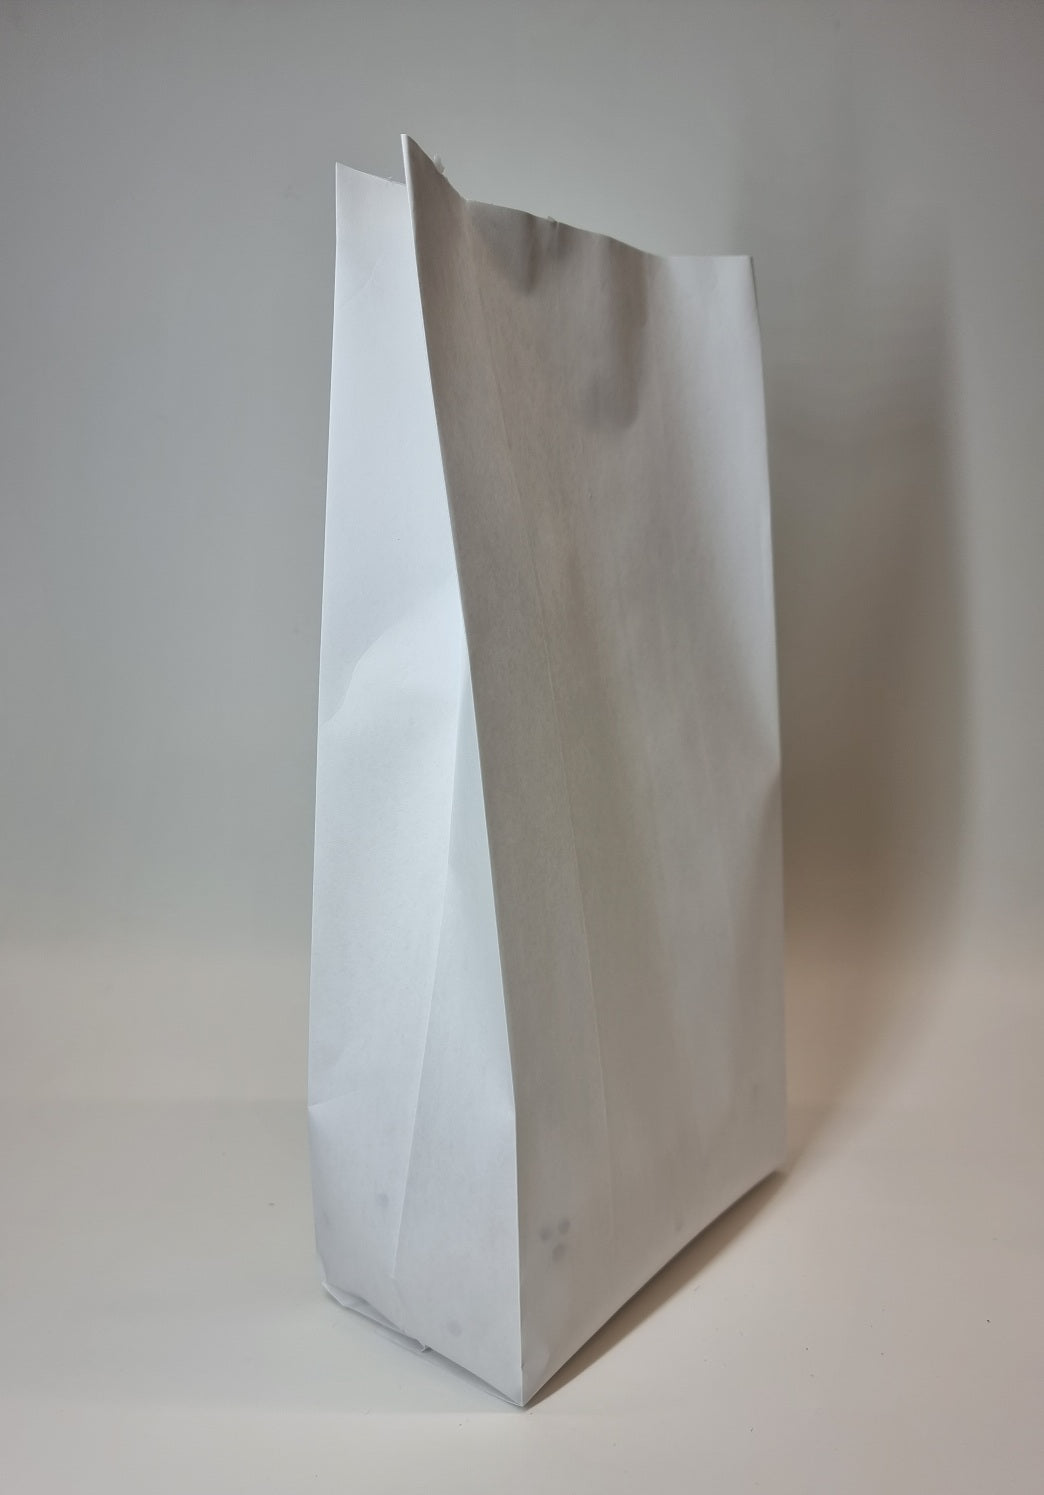 EmberPack™ Dry Goods 1kg Recyclable Paper Bag: 100 Bags Packing Materials EmberPack by EAM 